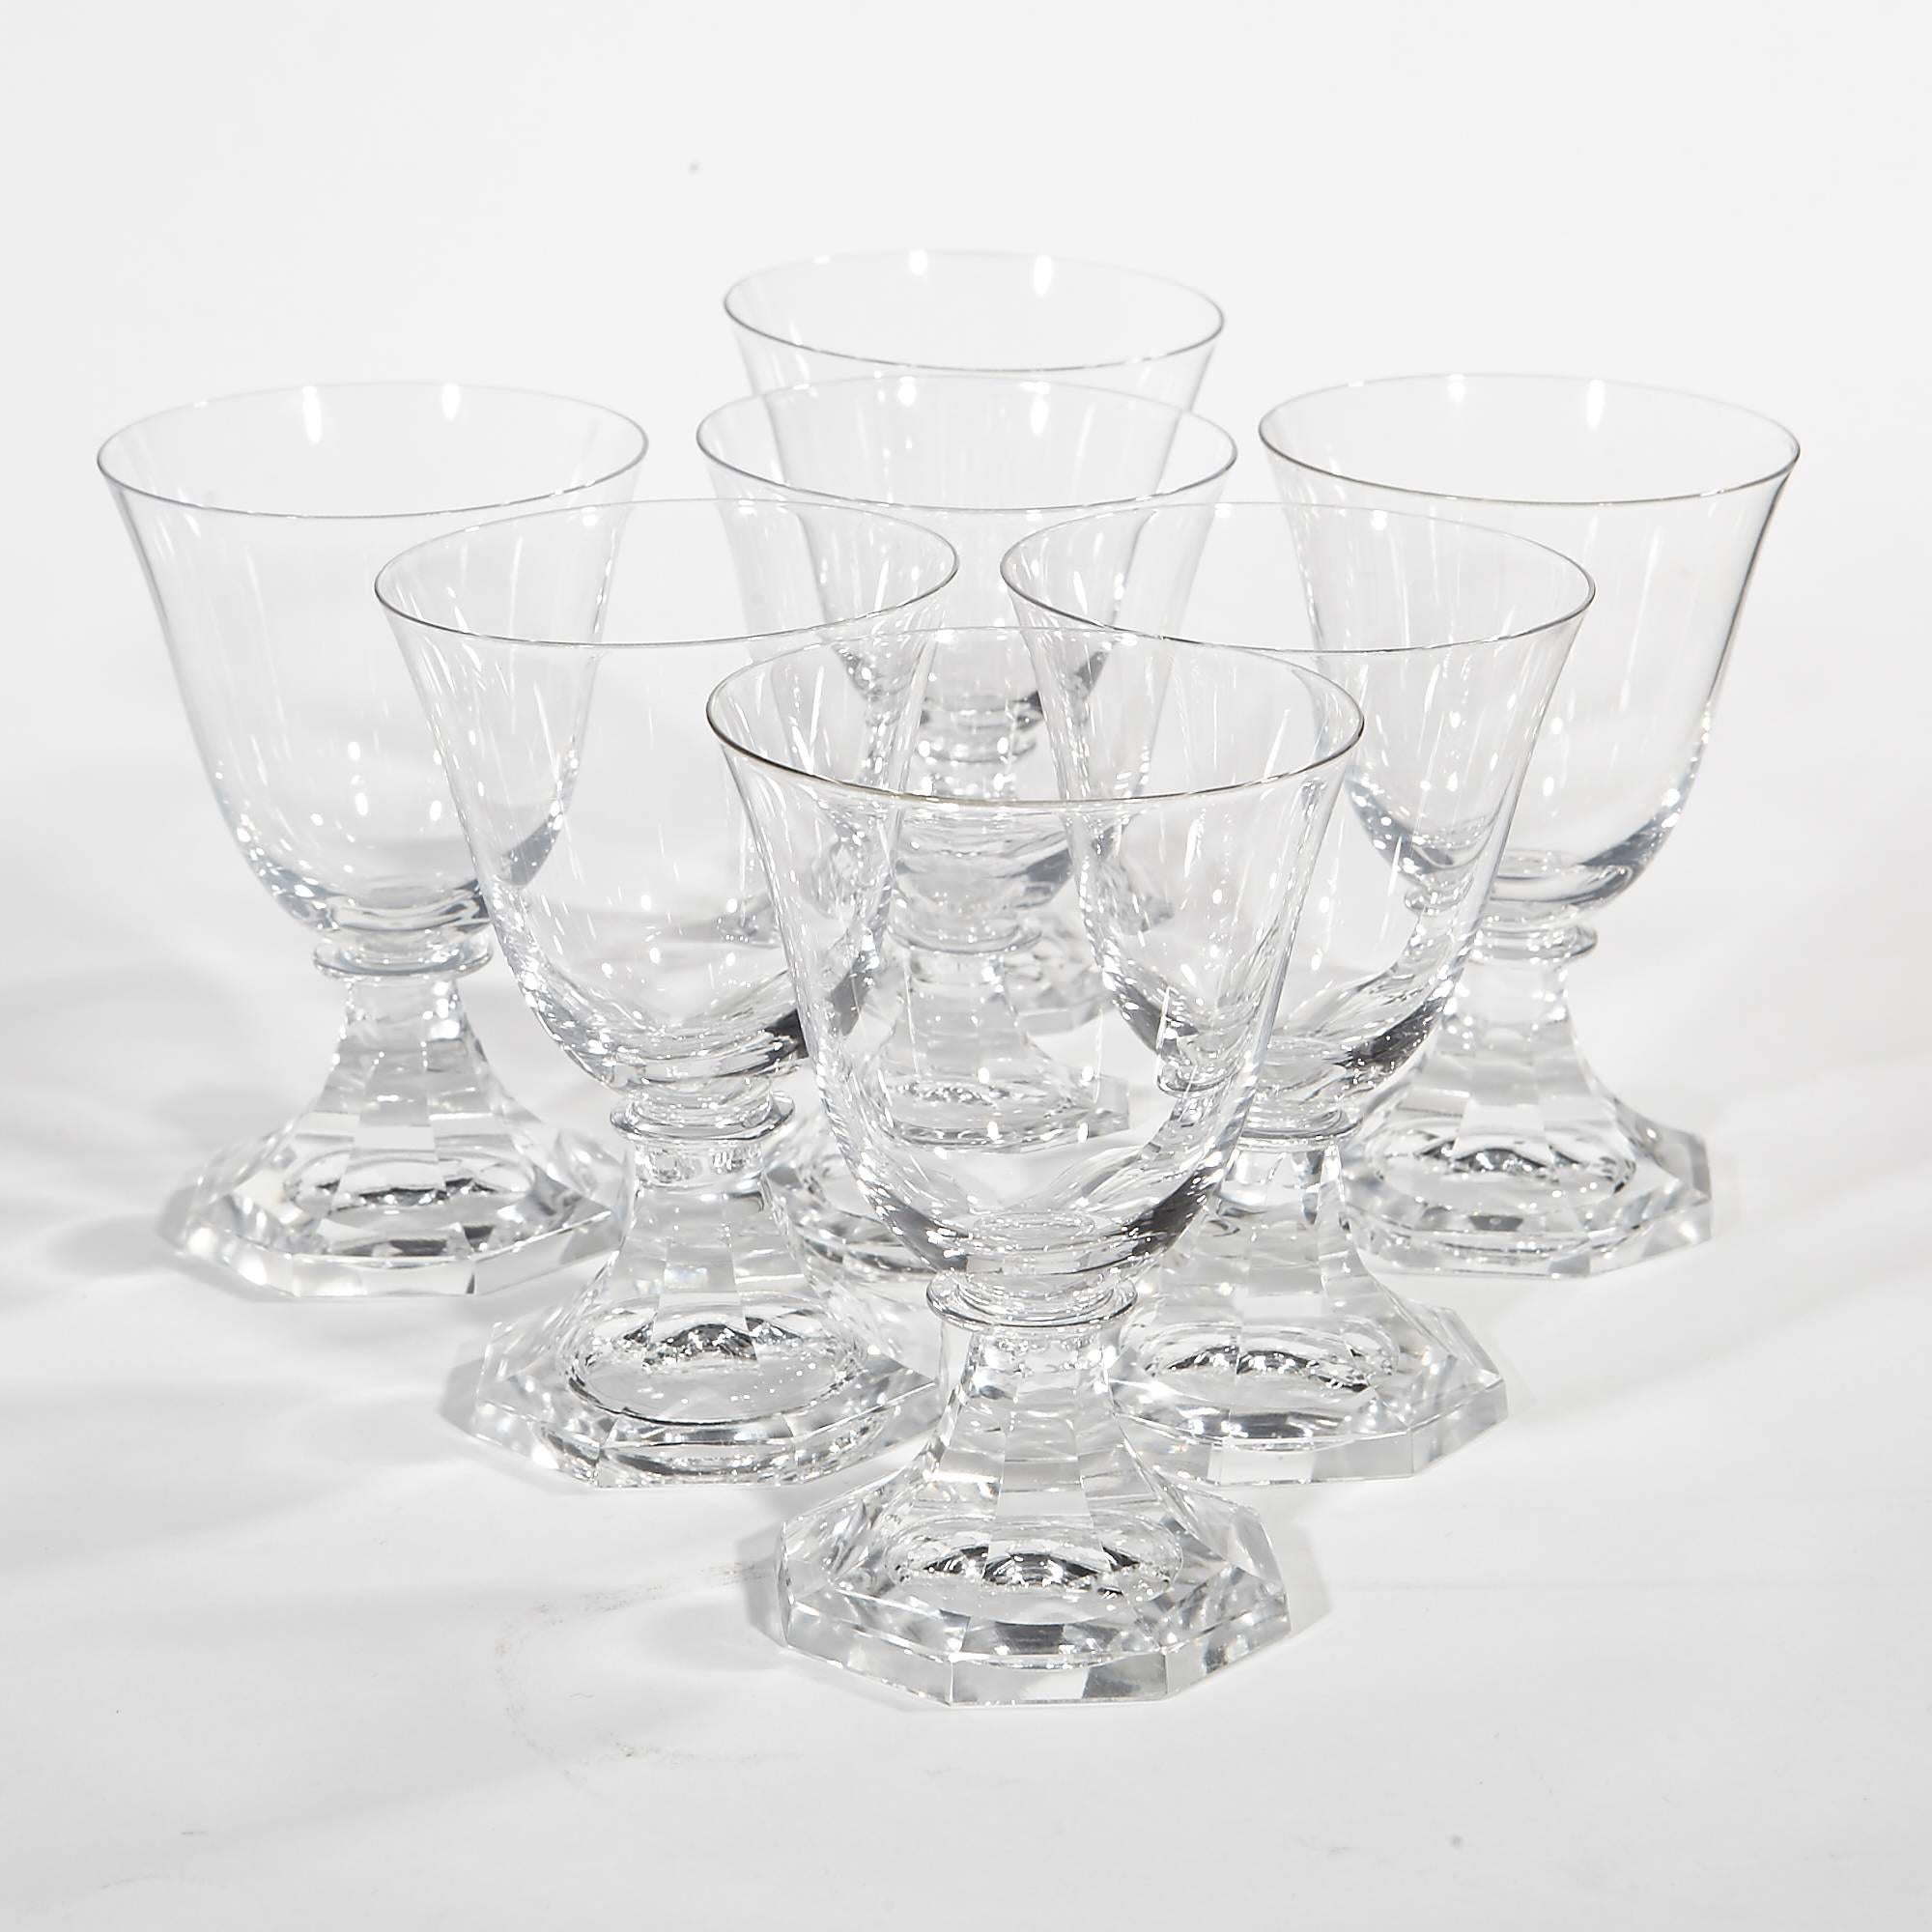 Blown Glass Orrefors Crystal Stems in the Seaford Pattern, 45 Pieces For Sale